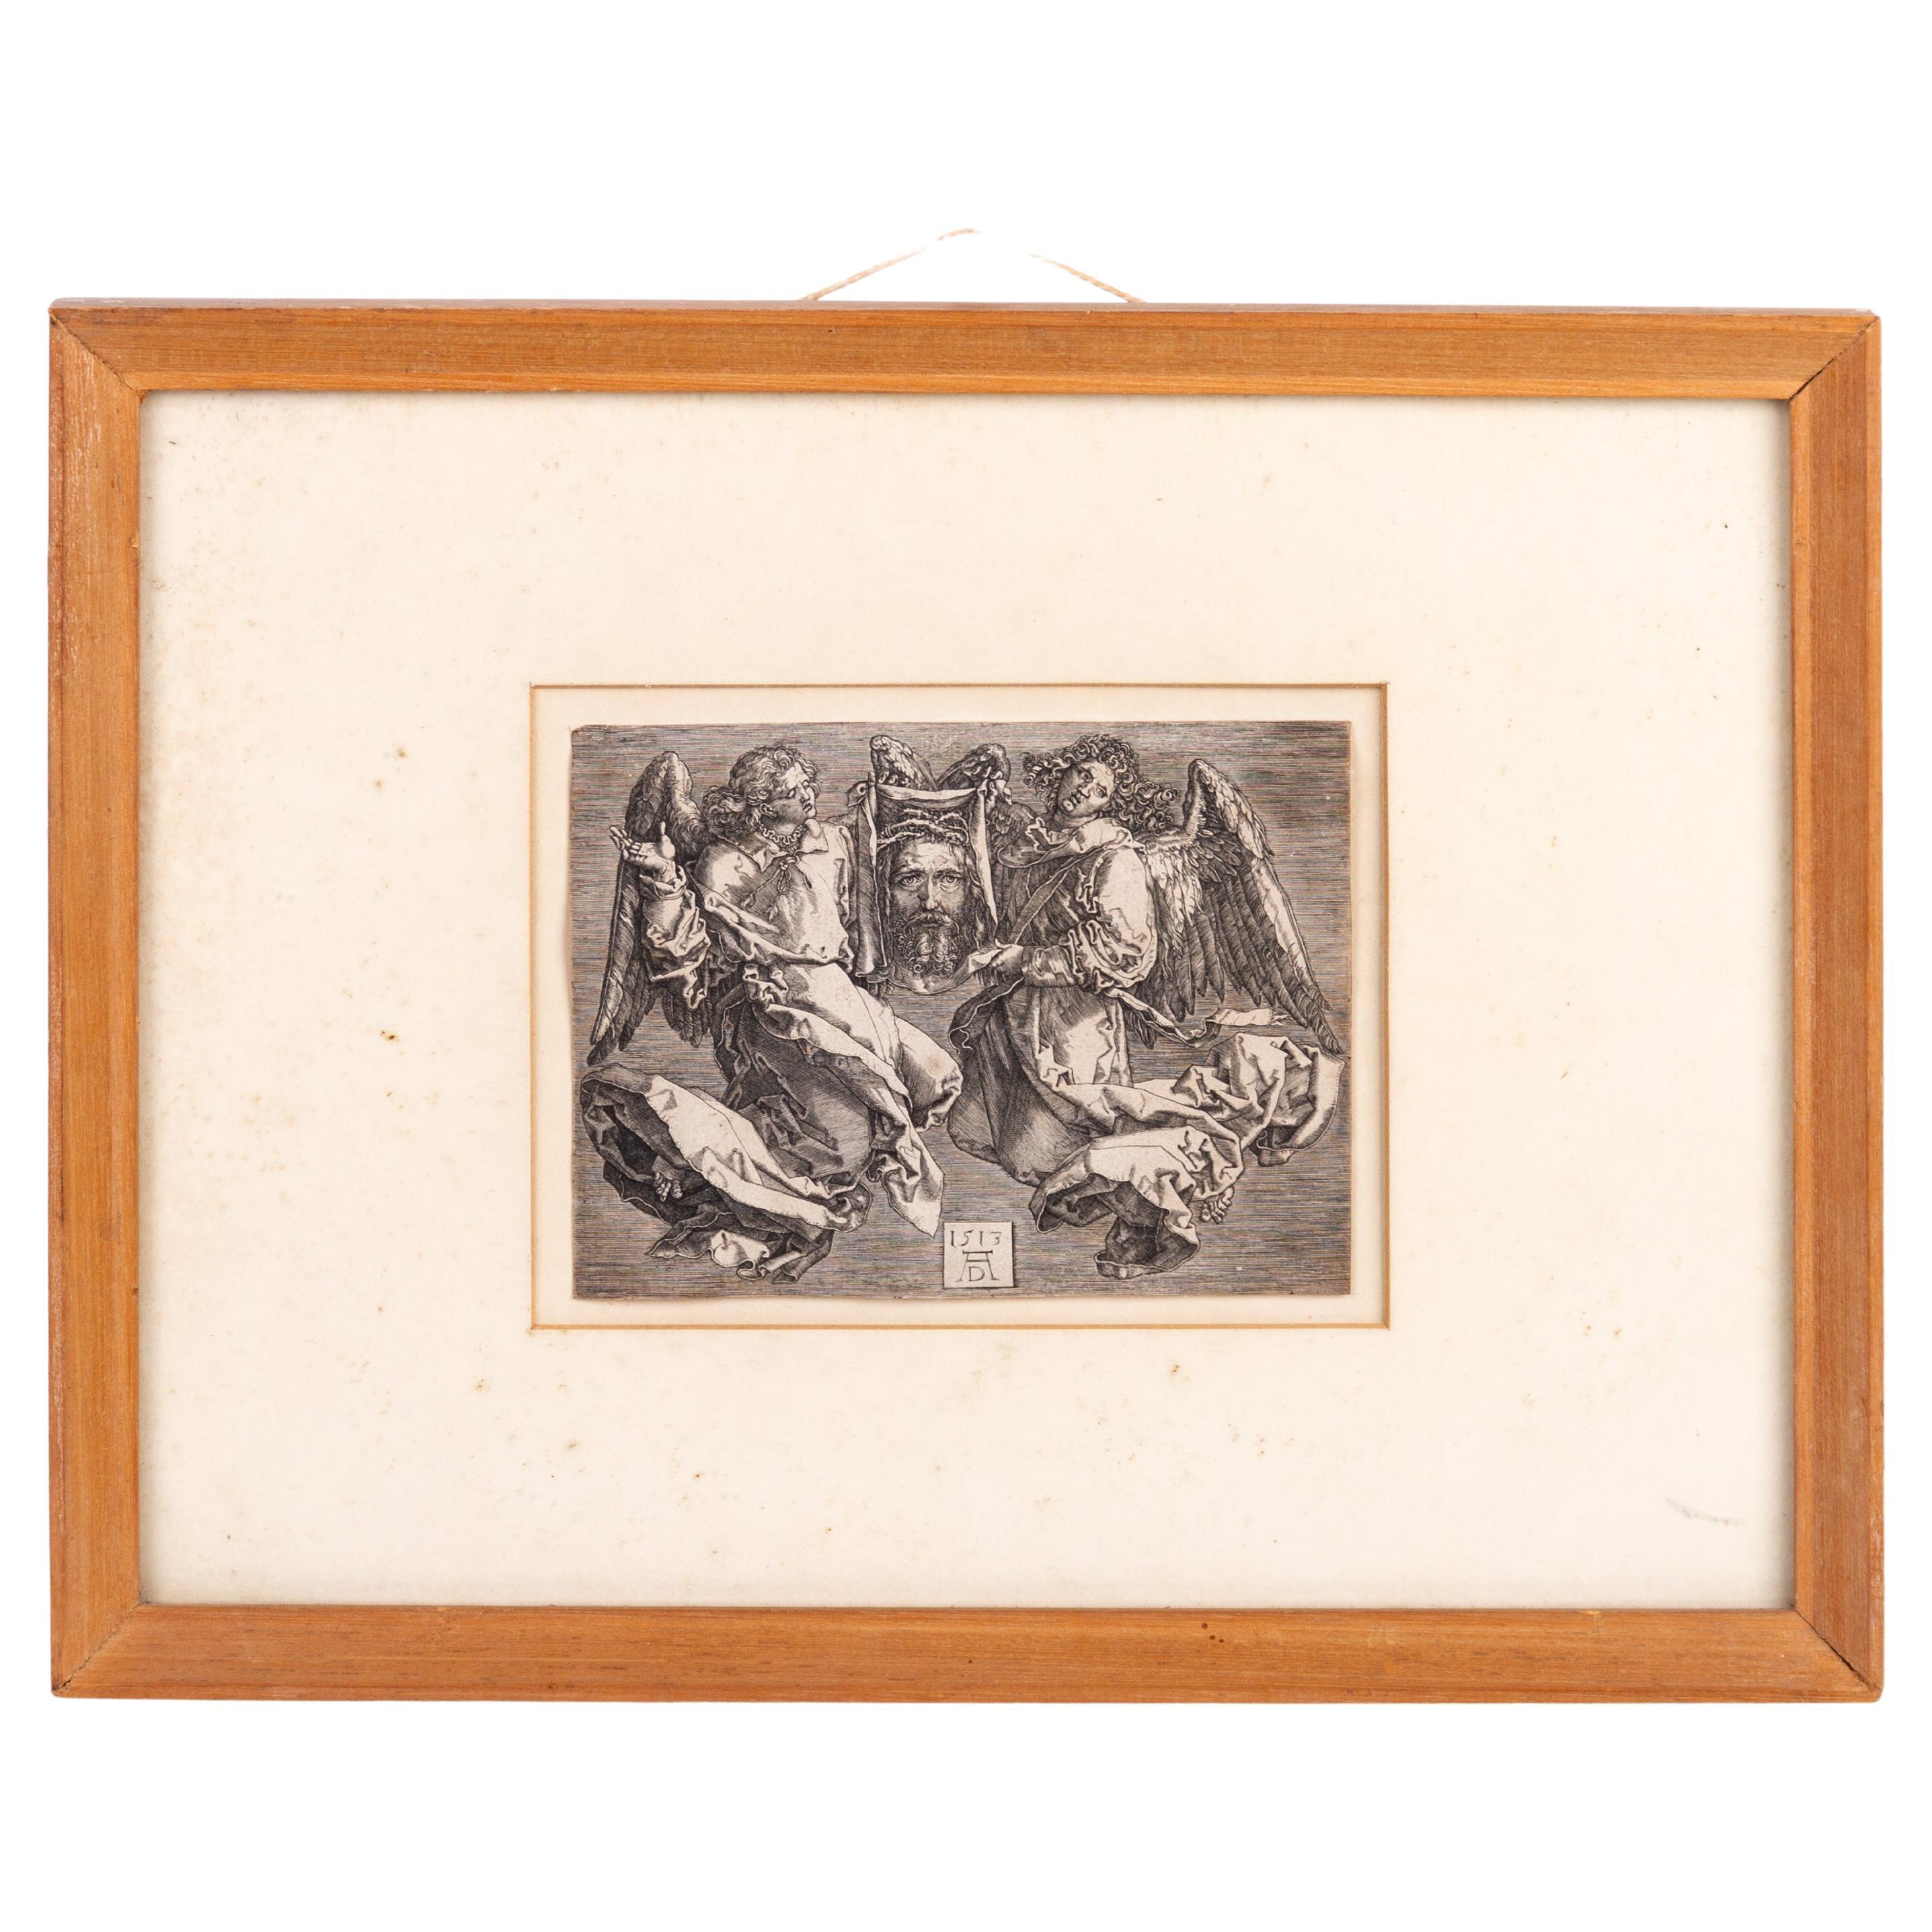 Albrecht Dürer 16th Century Old Master Engraving The Sudarium Of Saint Veronica
Good condition overall, framed and mounted under protective glass.

Dated and signed in the plate with the artist’s monogram on a tablet lower center.

A clean & clear